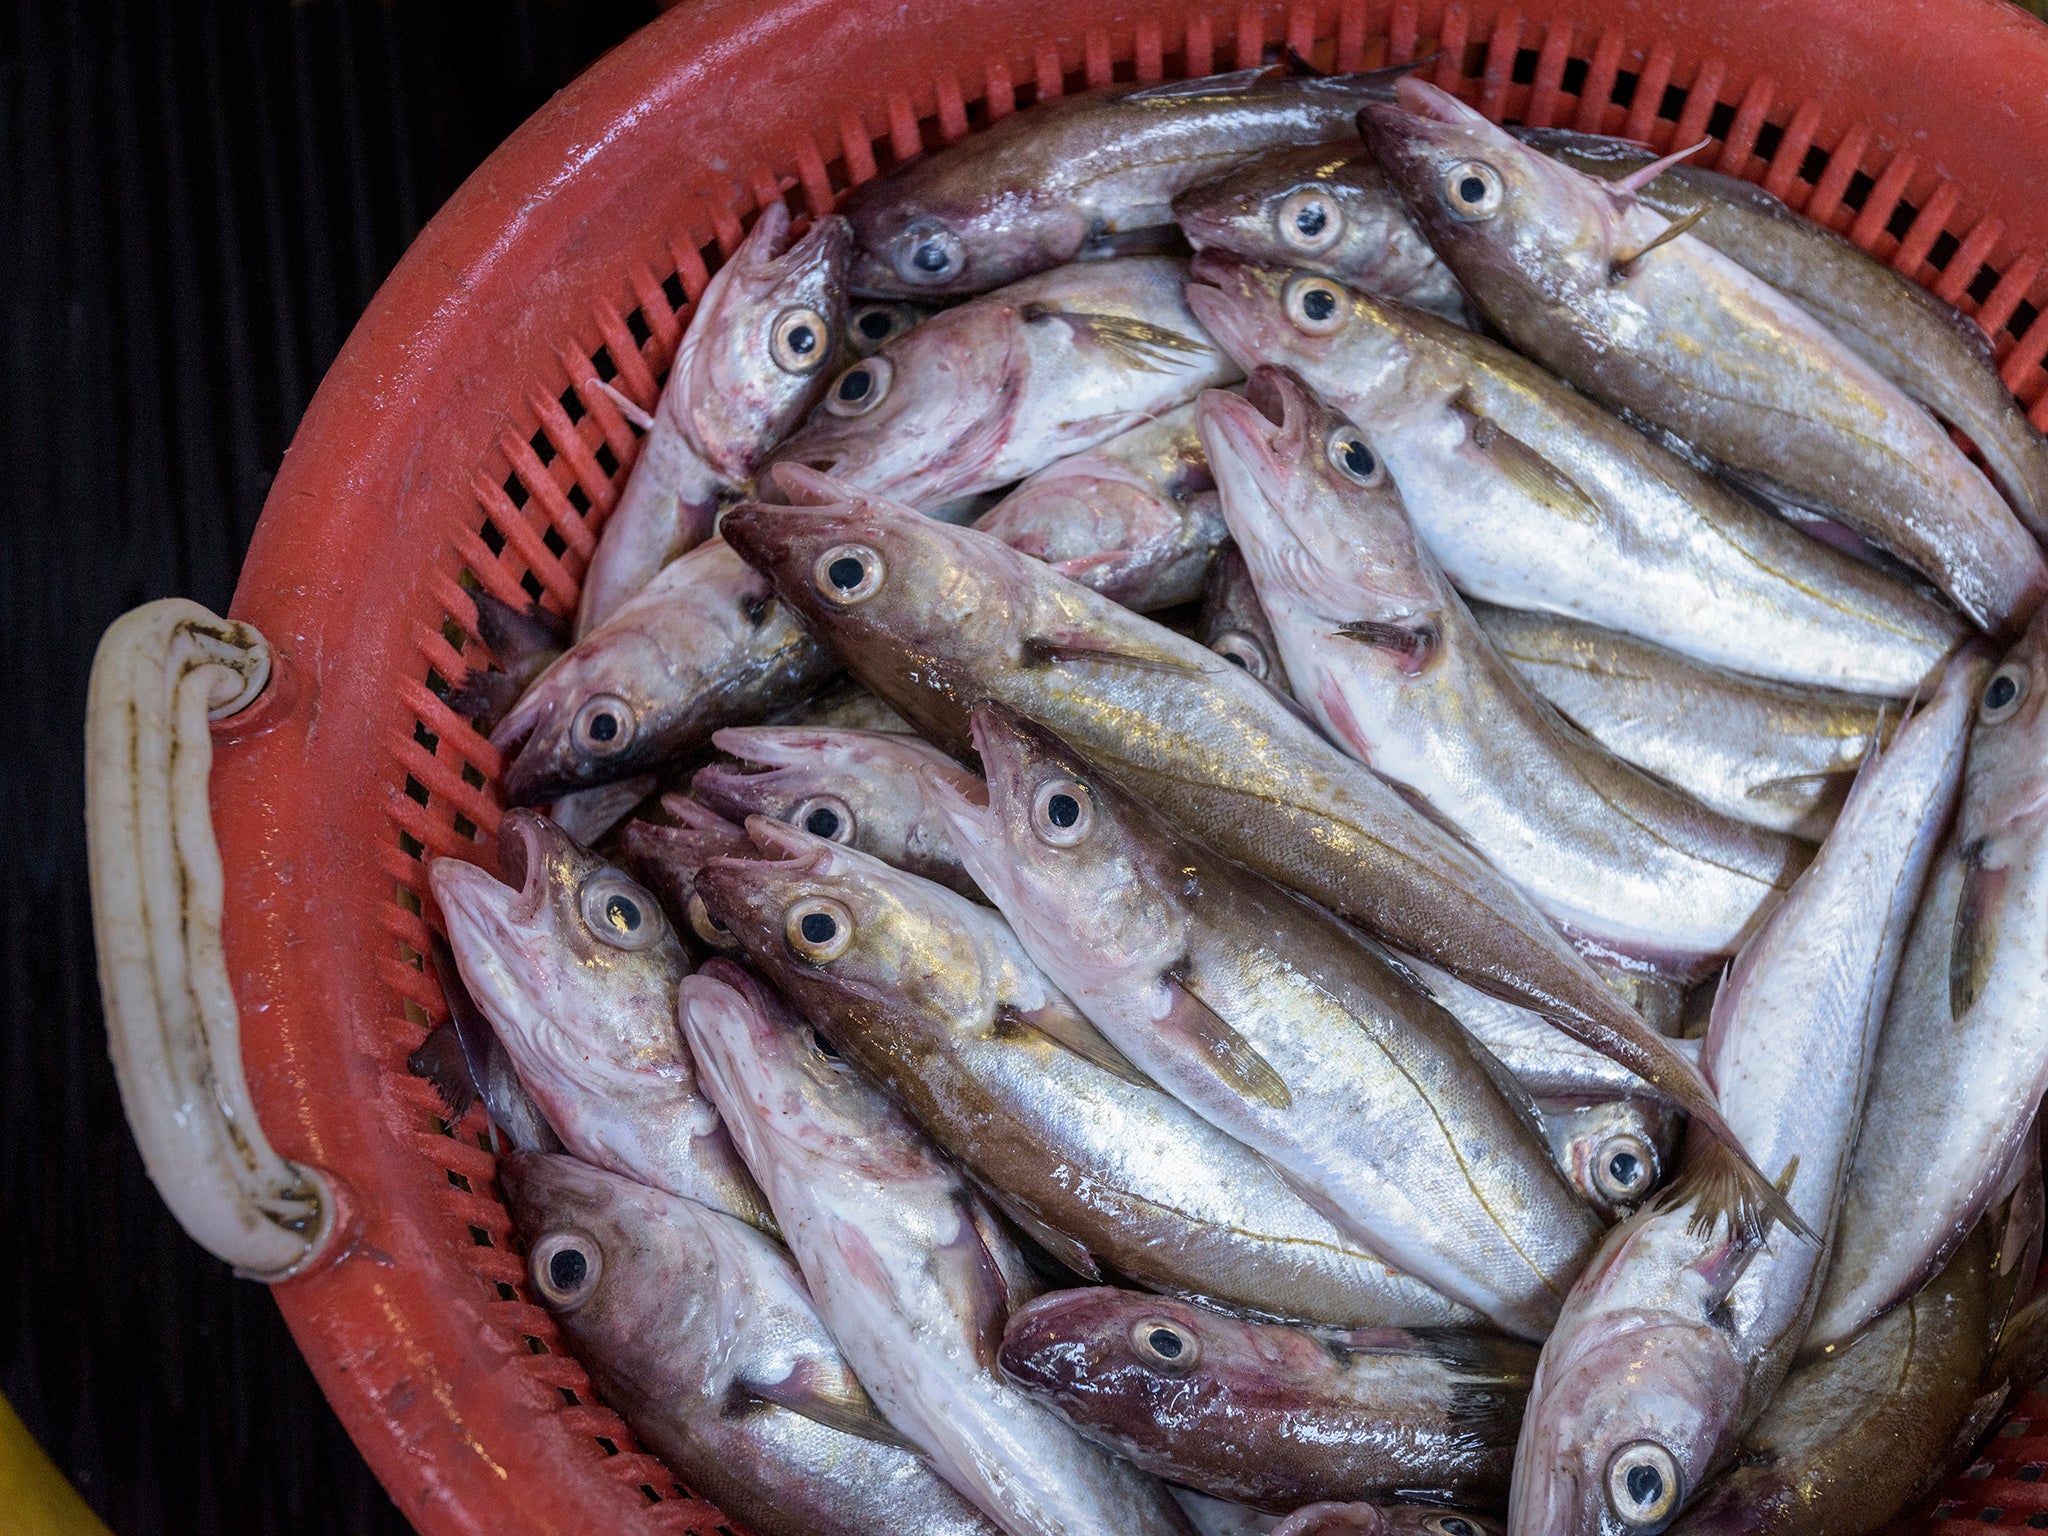 Omega-3 abundant in oily fish but of no benefit in supplements